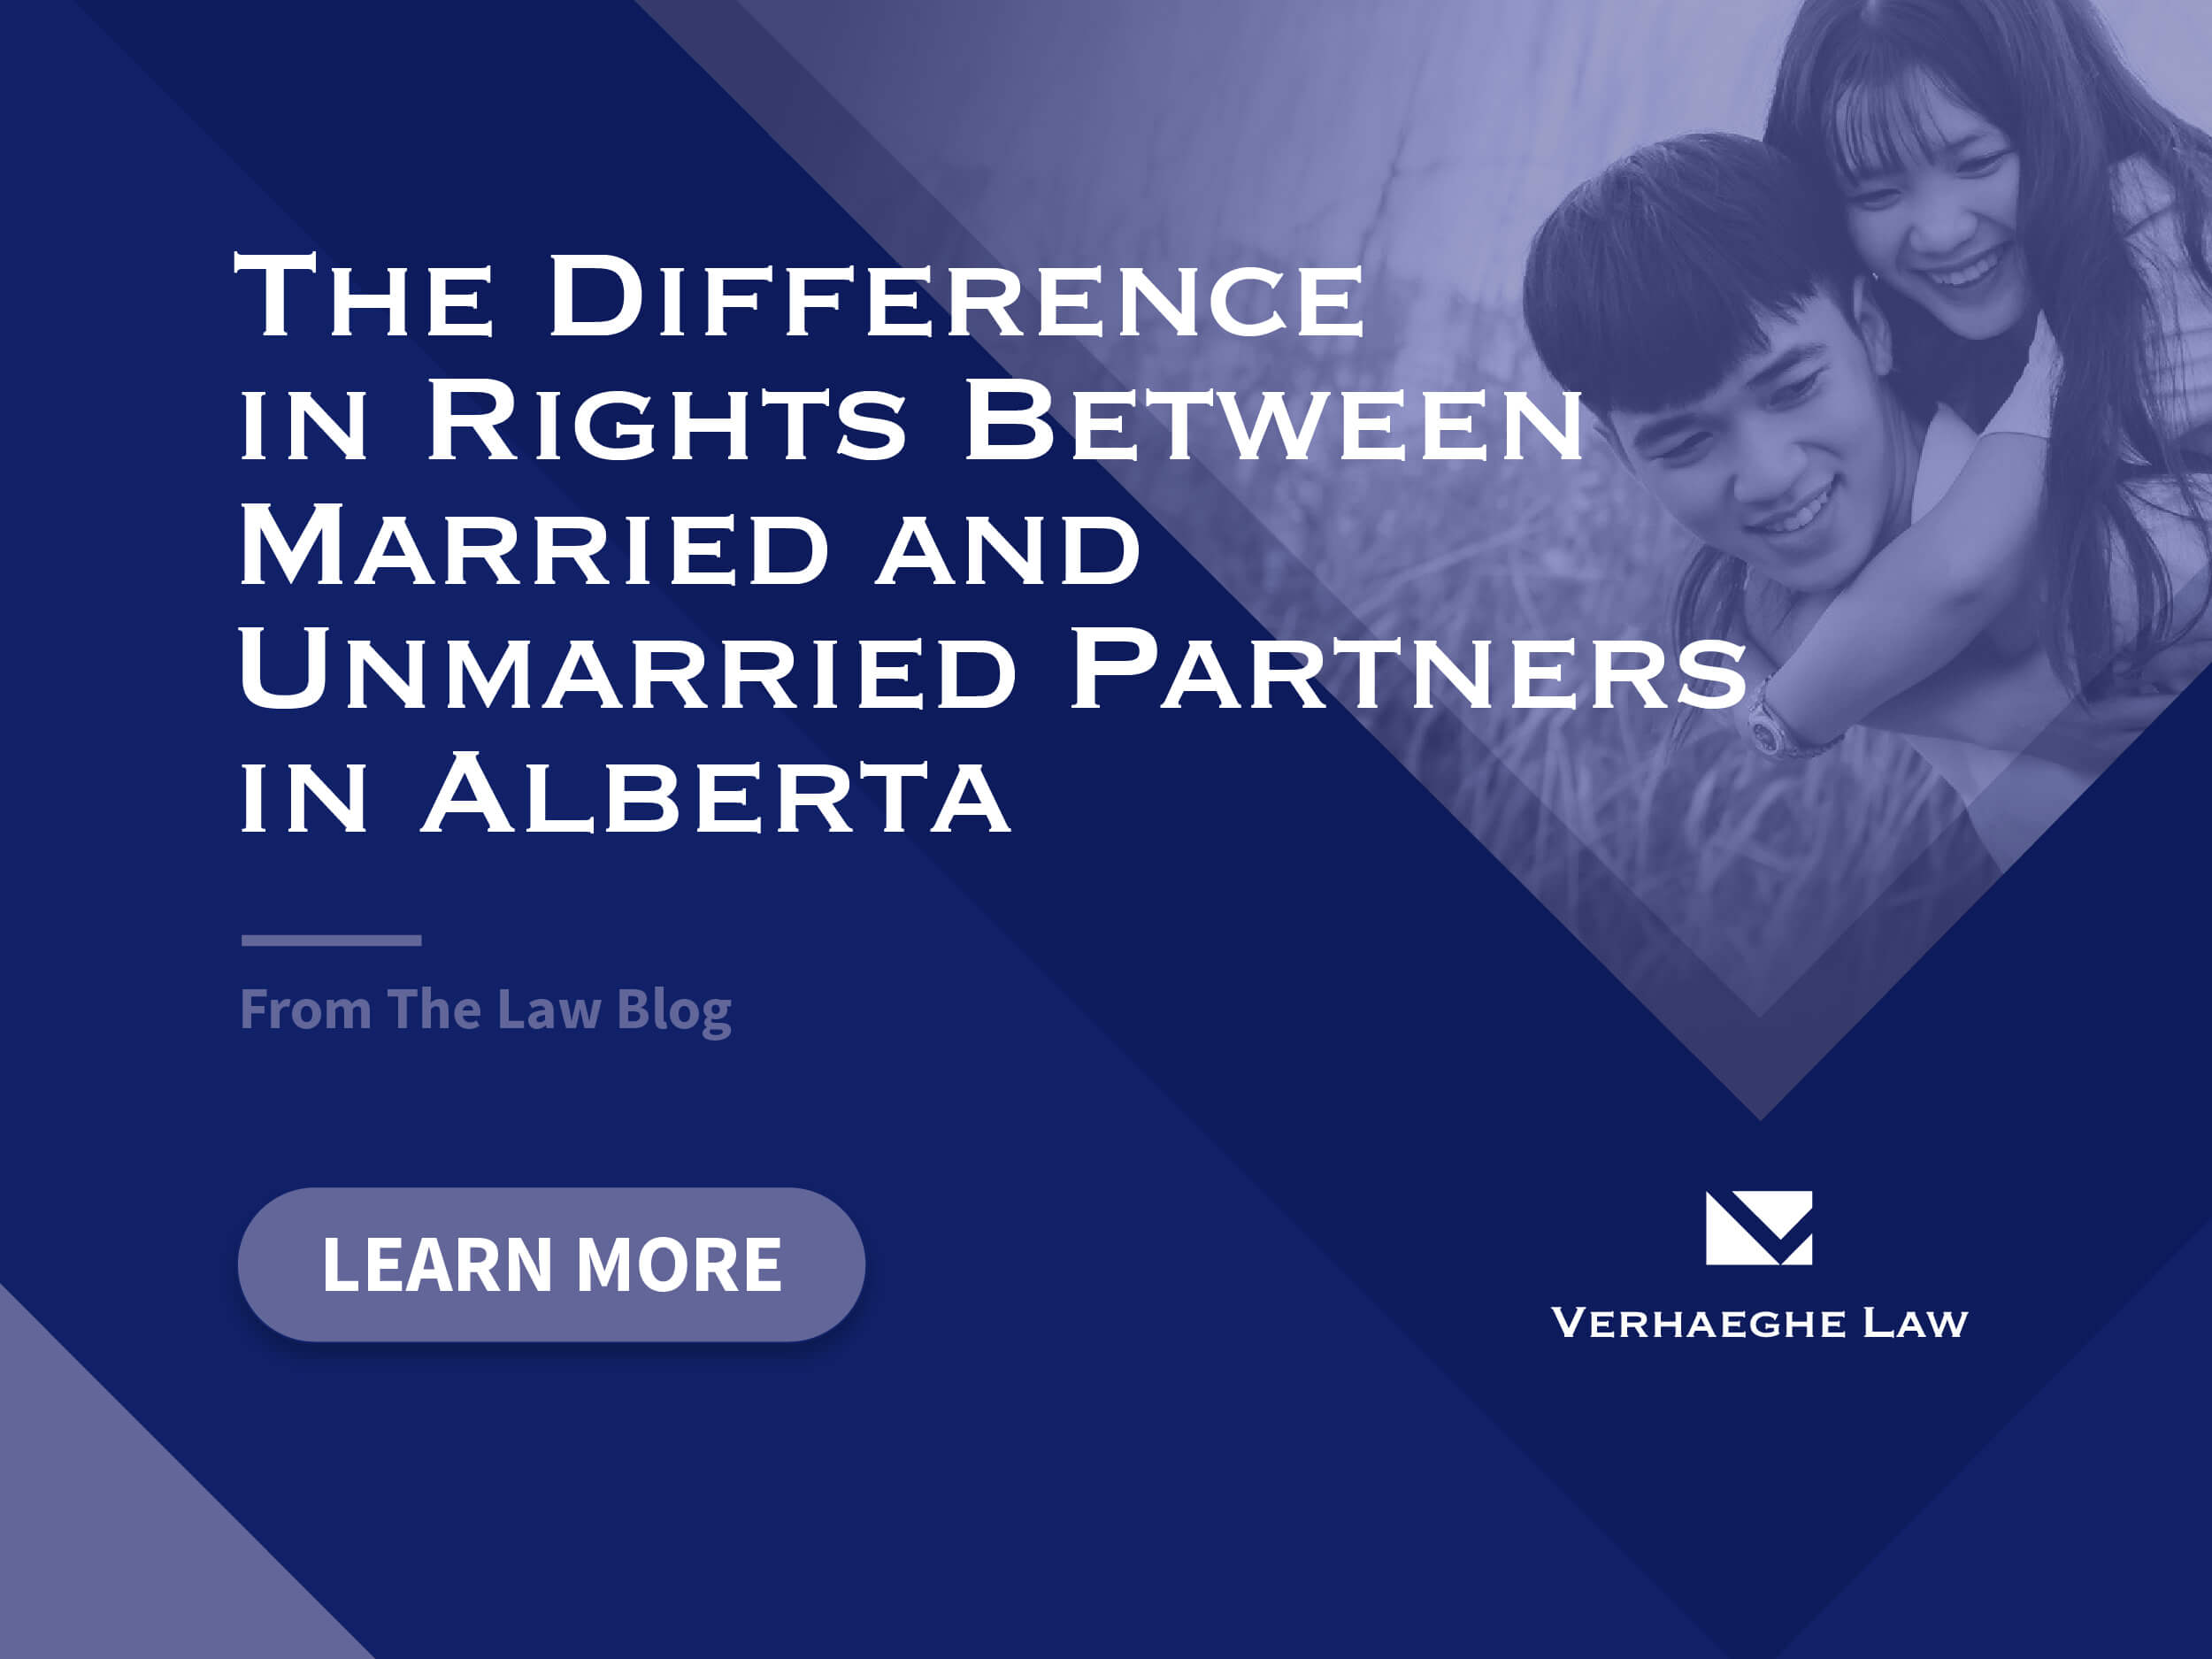 The Difference in Rights Between Married and Unmarried Partners in Alberta